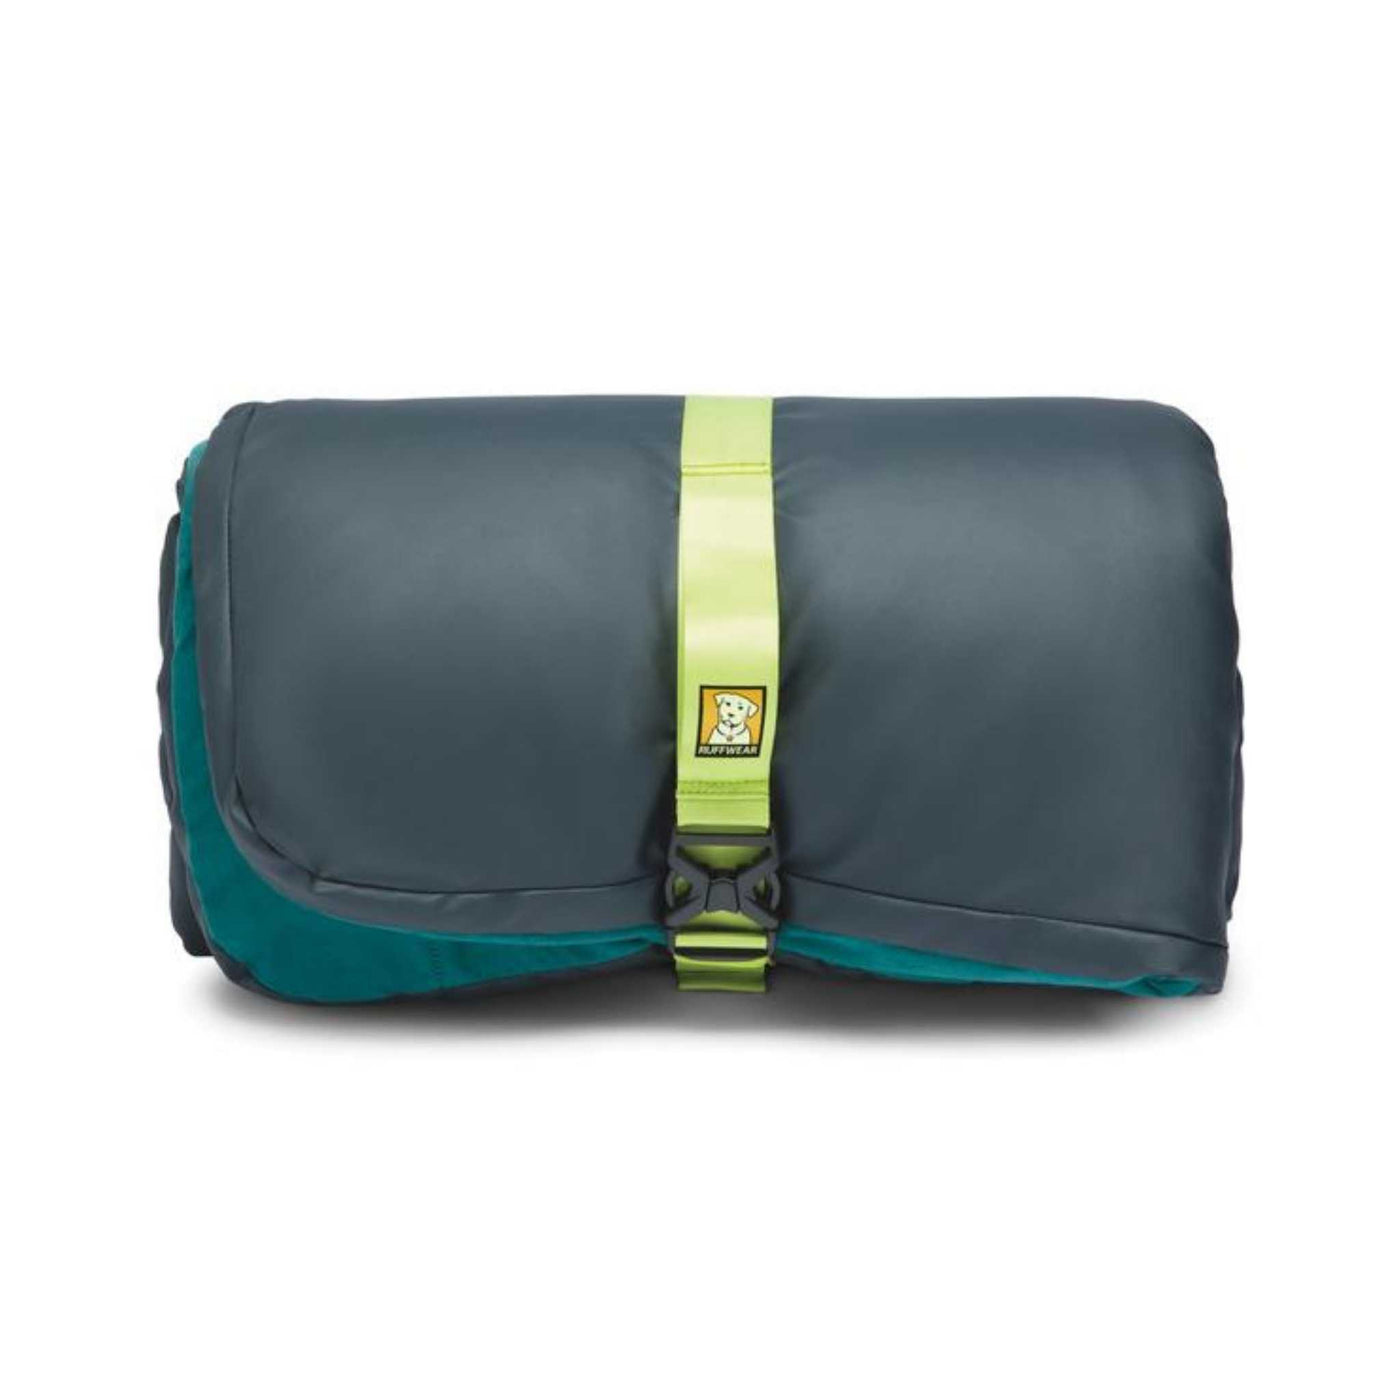 Ruffwear Mt Bachelor Pad Portable Dog Bed | Outdoor gear for Dog's NZ | Further Faster Christchurch NZ #tumalo-teal